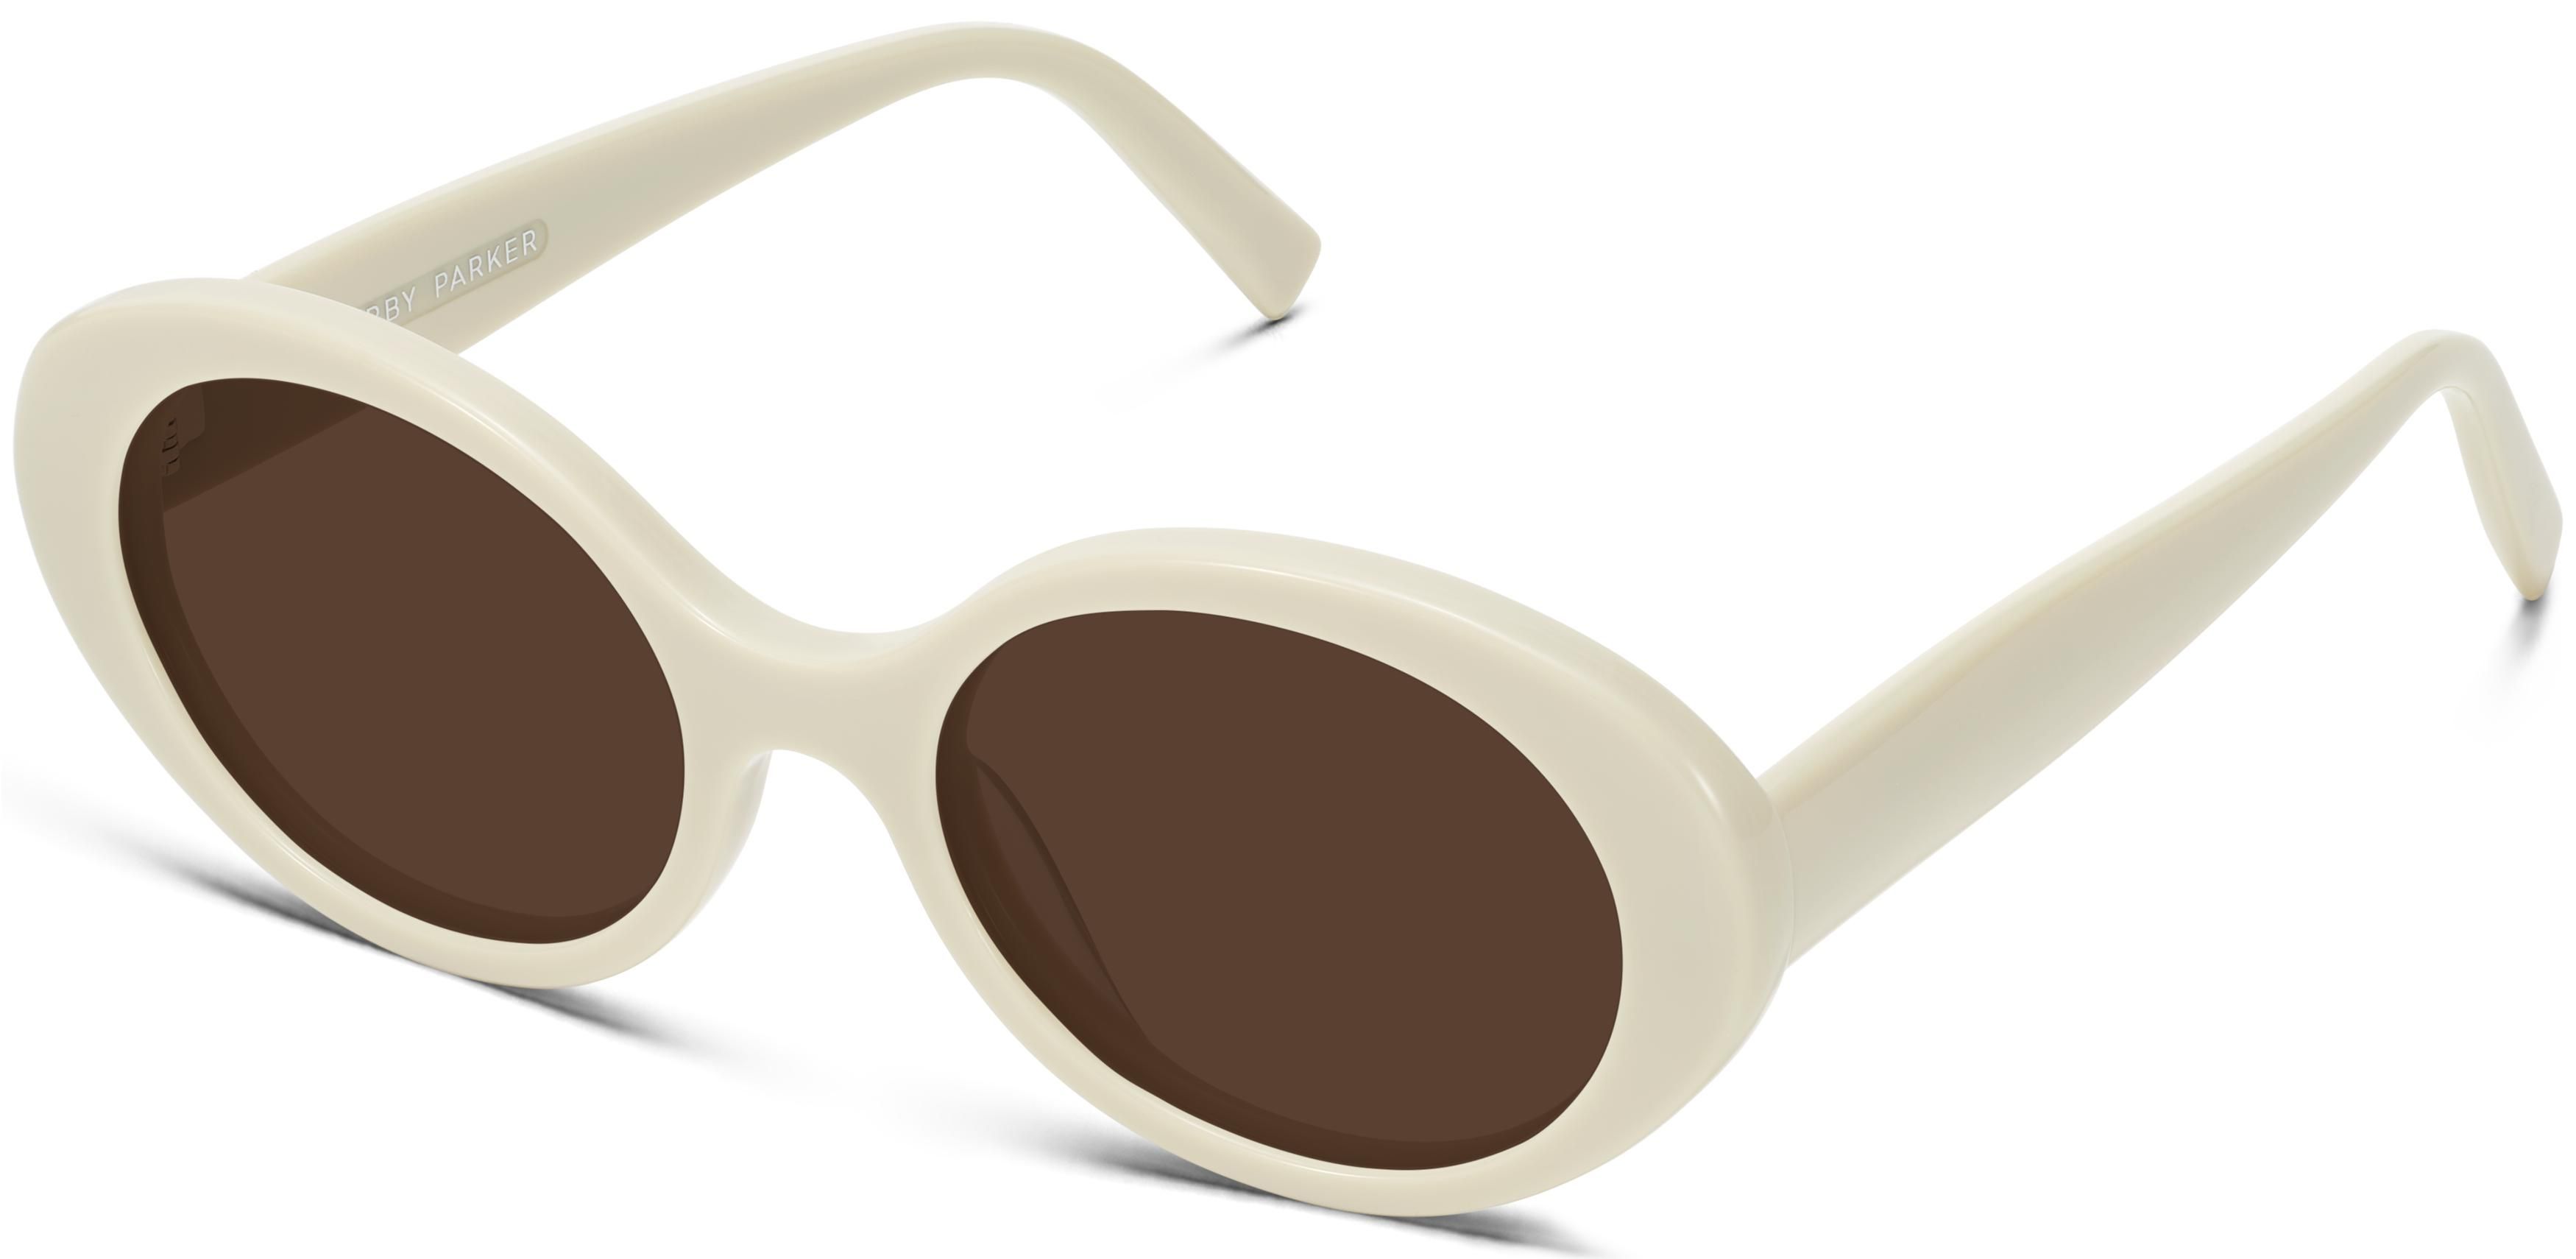 Jeanette Sunglasses in Eggshell | Warby Parker | Warby Parker (US)